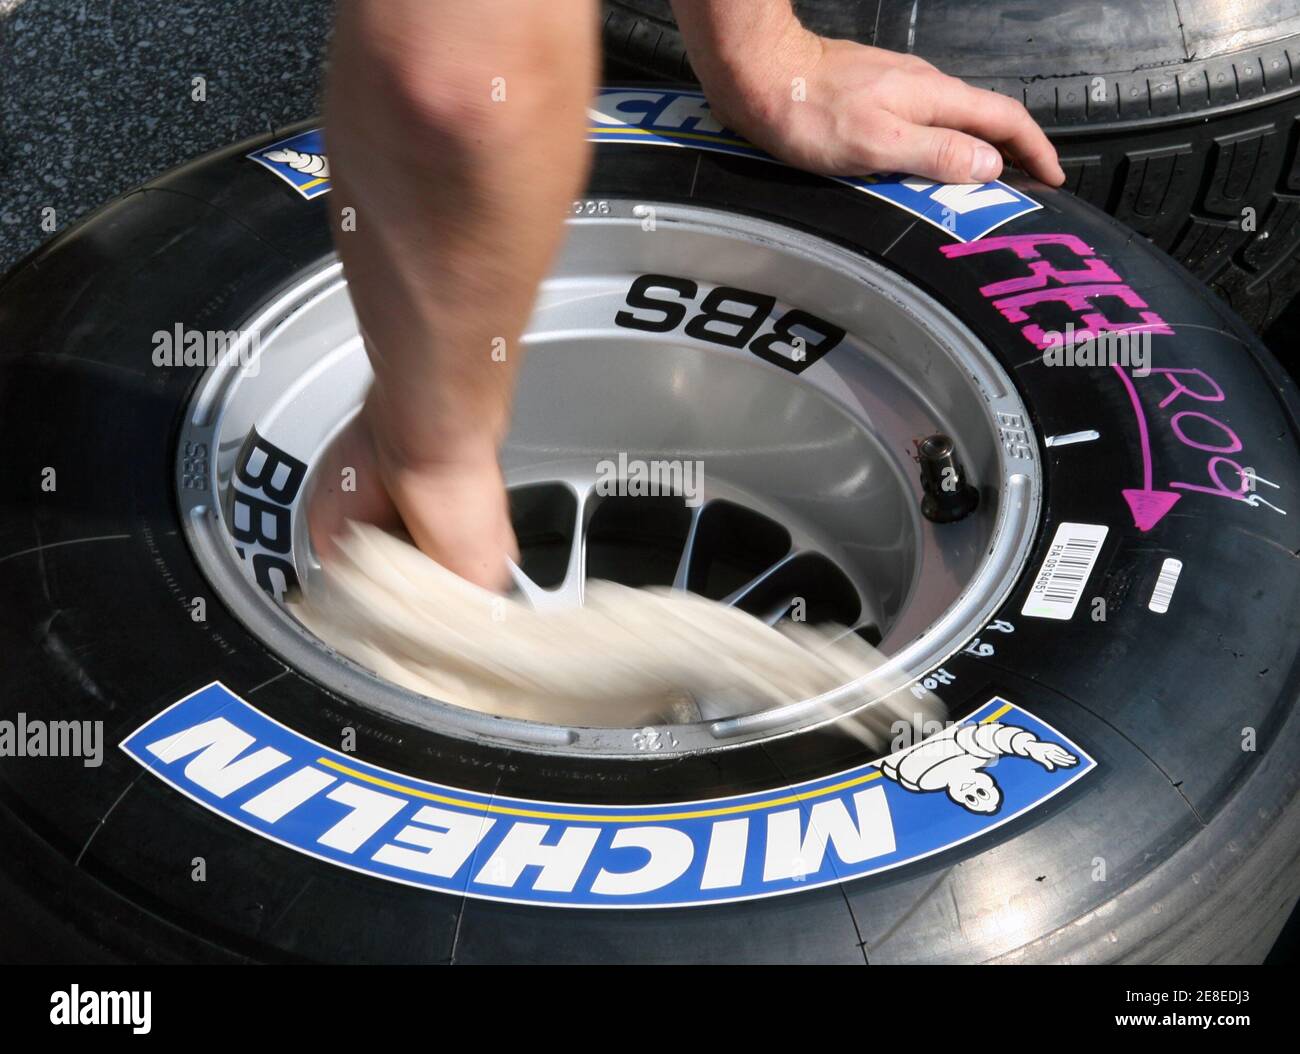 Honda team mechanic Paul Harris wipes clean a Michelin tire in the pits  during the U.S. Formula One Grand Prix weekend in Indianapolis June 29,  2006. The spotlight this weekend will be